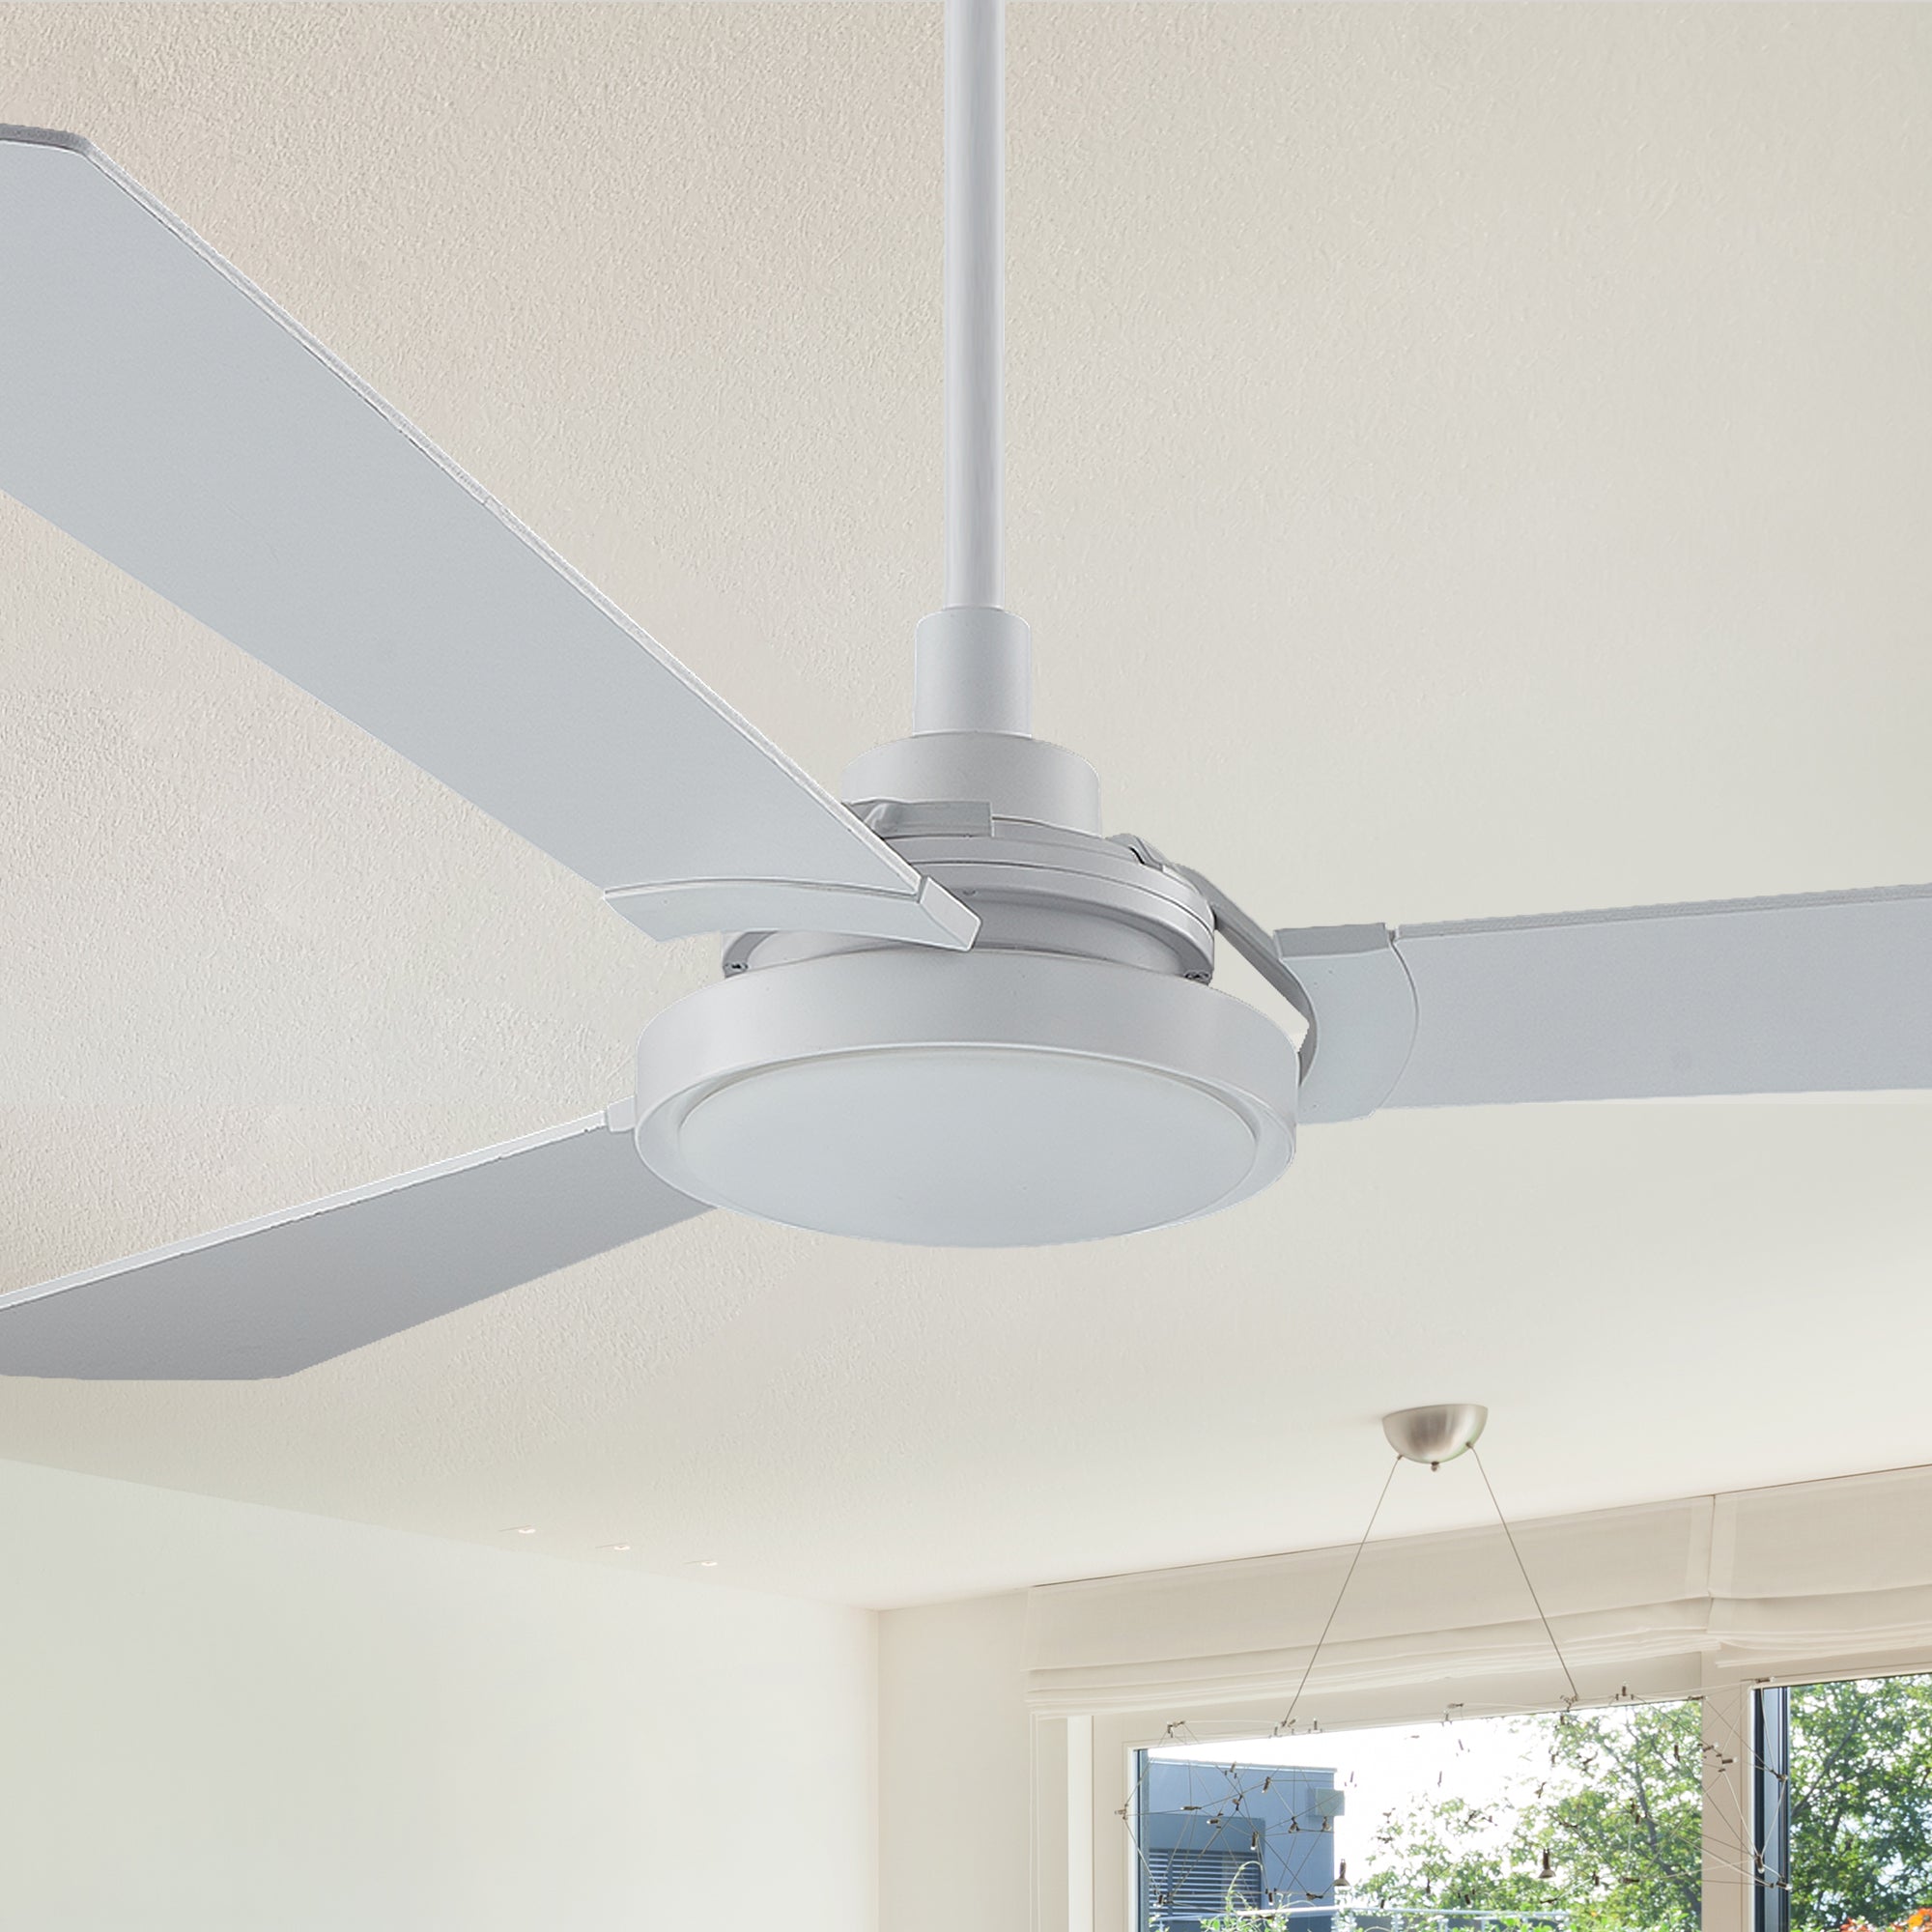 Carro Viter smart ceiling fan with light designed with white finish, elegant Plywood blades, Glass shade and integrated 4000K LED daylight. 